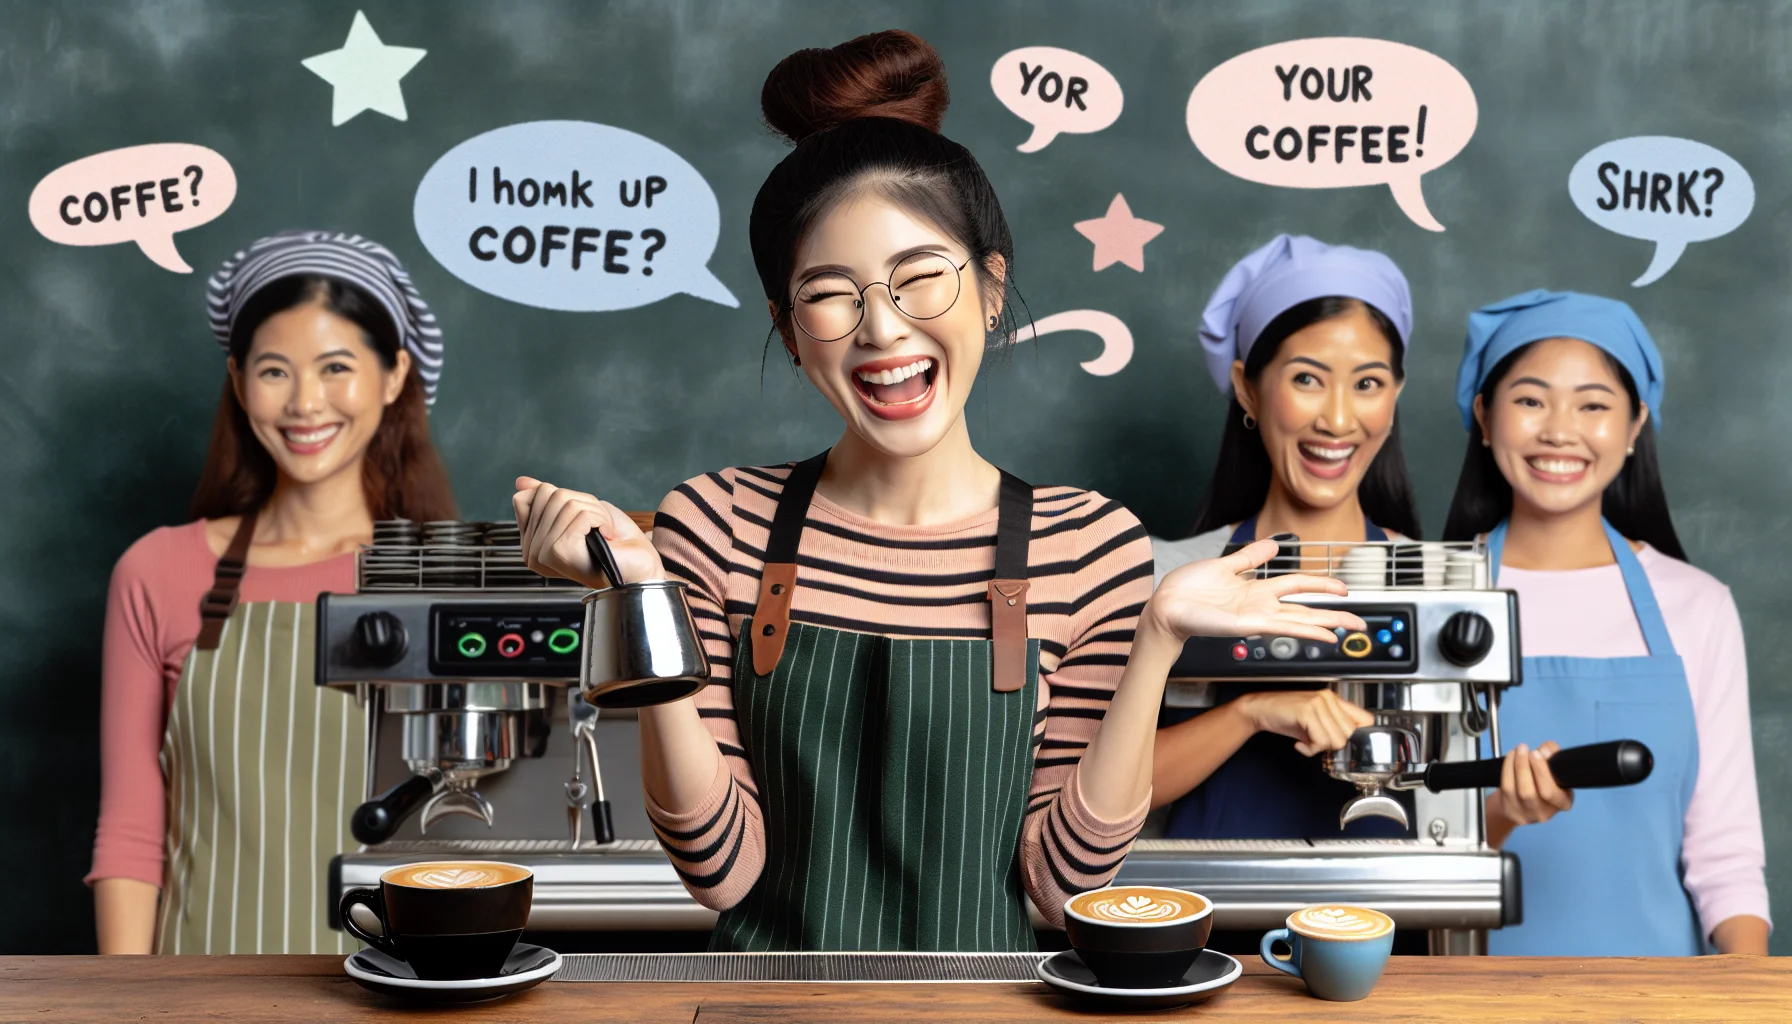 Create a humorous and realistic scene in a coffee shop setting. An East Asian female barista named Rose, with her hair tied in a bun, is charmingly encouraging her diverse customers to indulge in their coffee-drinking experiences. She is multitasking between pulling espresso shots, steam-milking, and making latte art, all with a playful wink and an infectious smile. Behind her is a colorful chalkboard with funny quotes relating to coffee that seem to be enticing the customers.